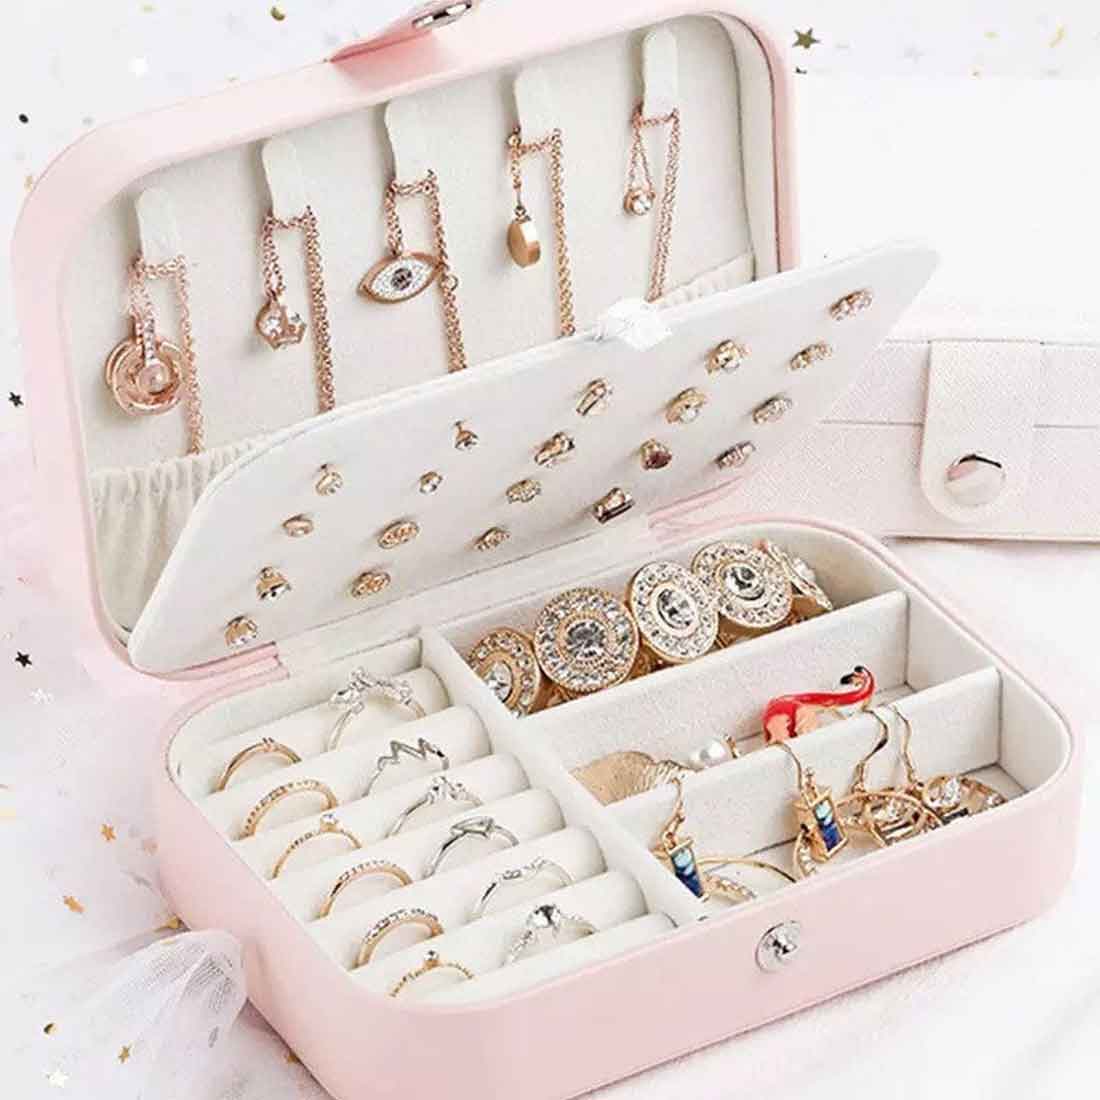 Personalized Jewelry Organizer Pouch for Women Storage Case for Rings Earrings and Pendants - Pink Monogram